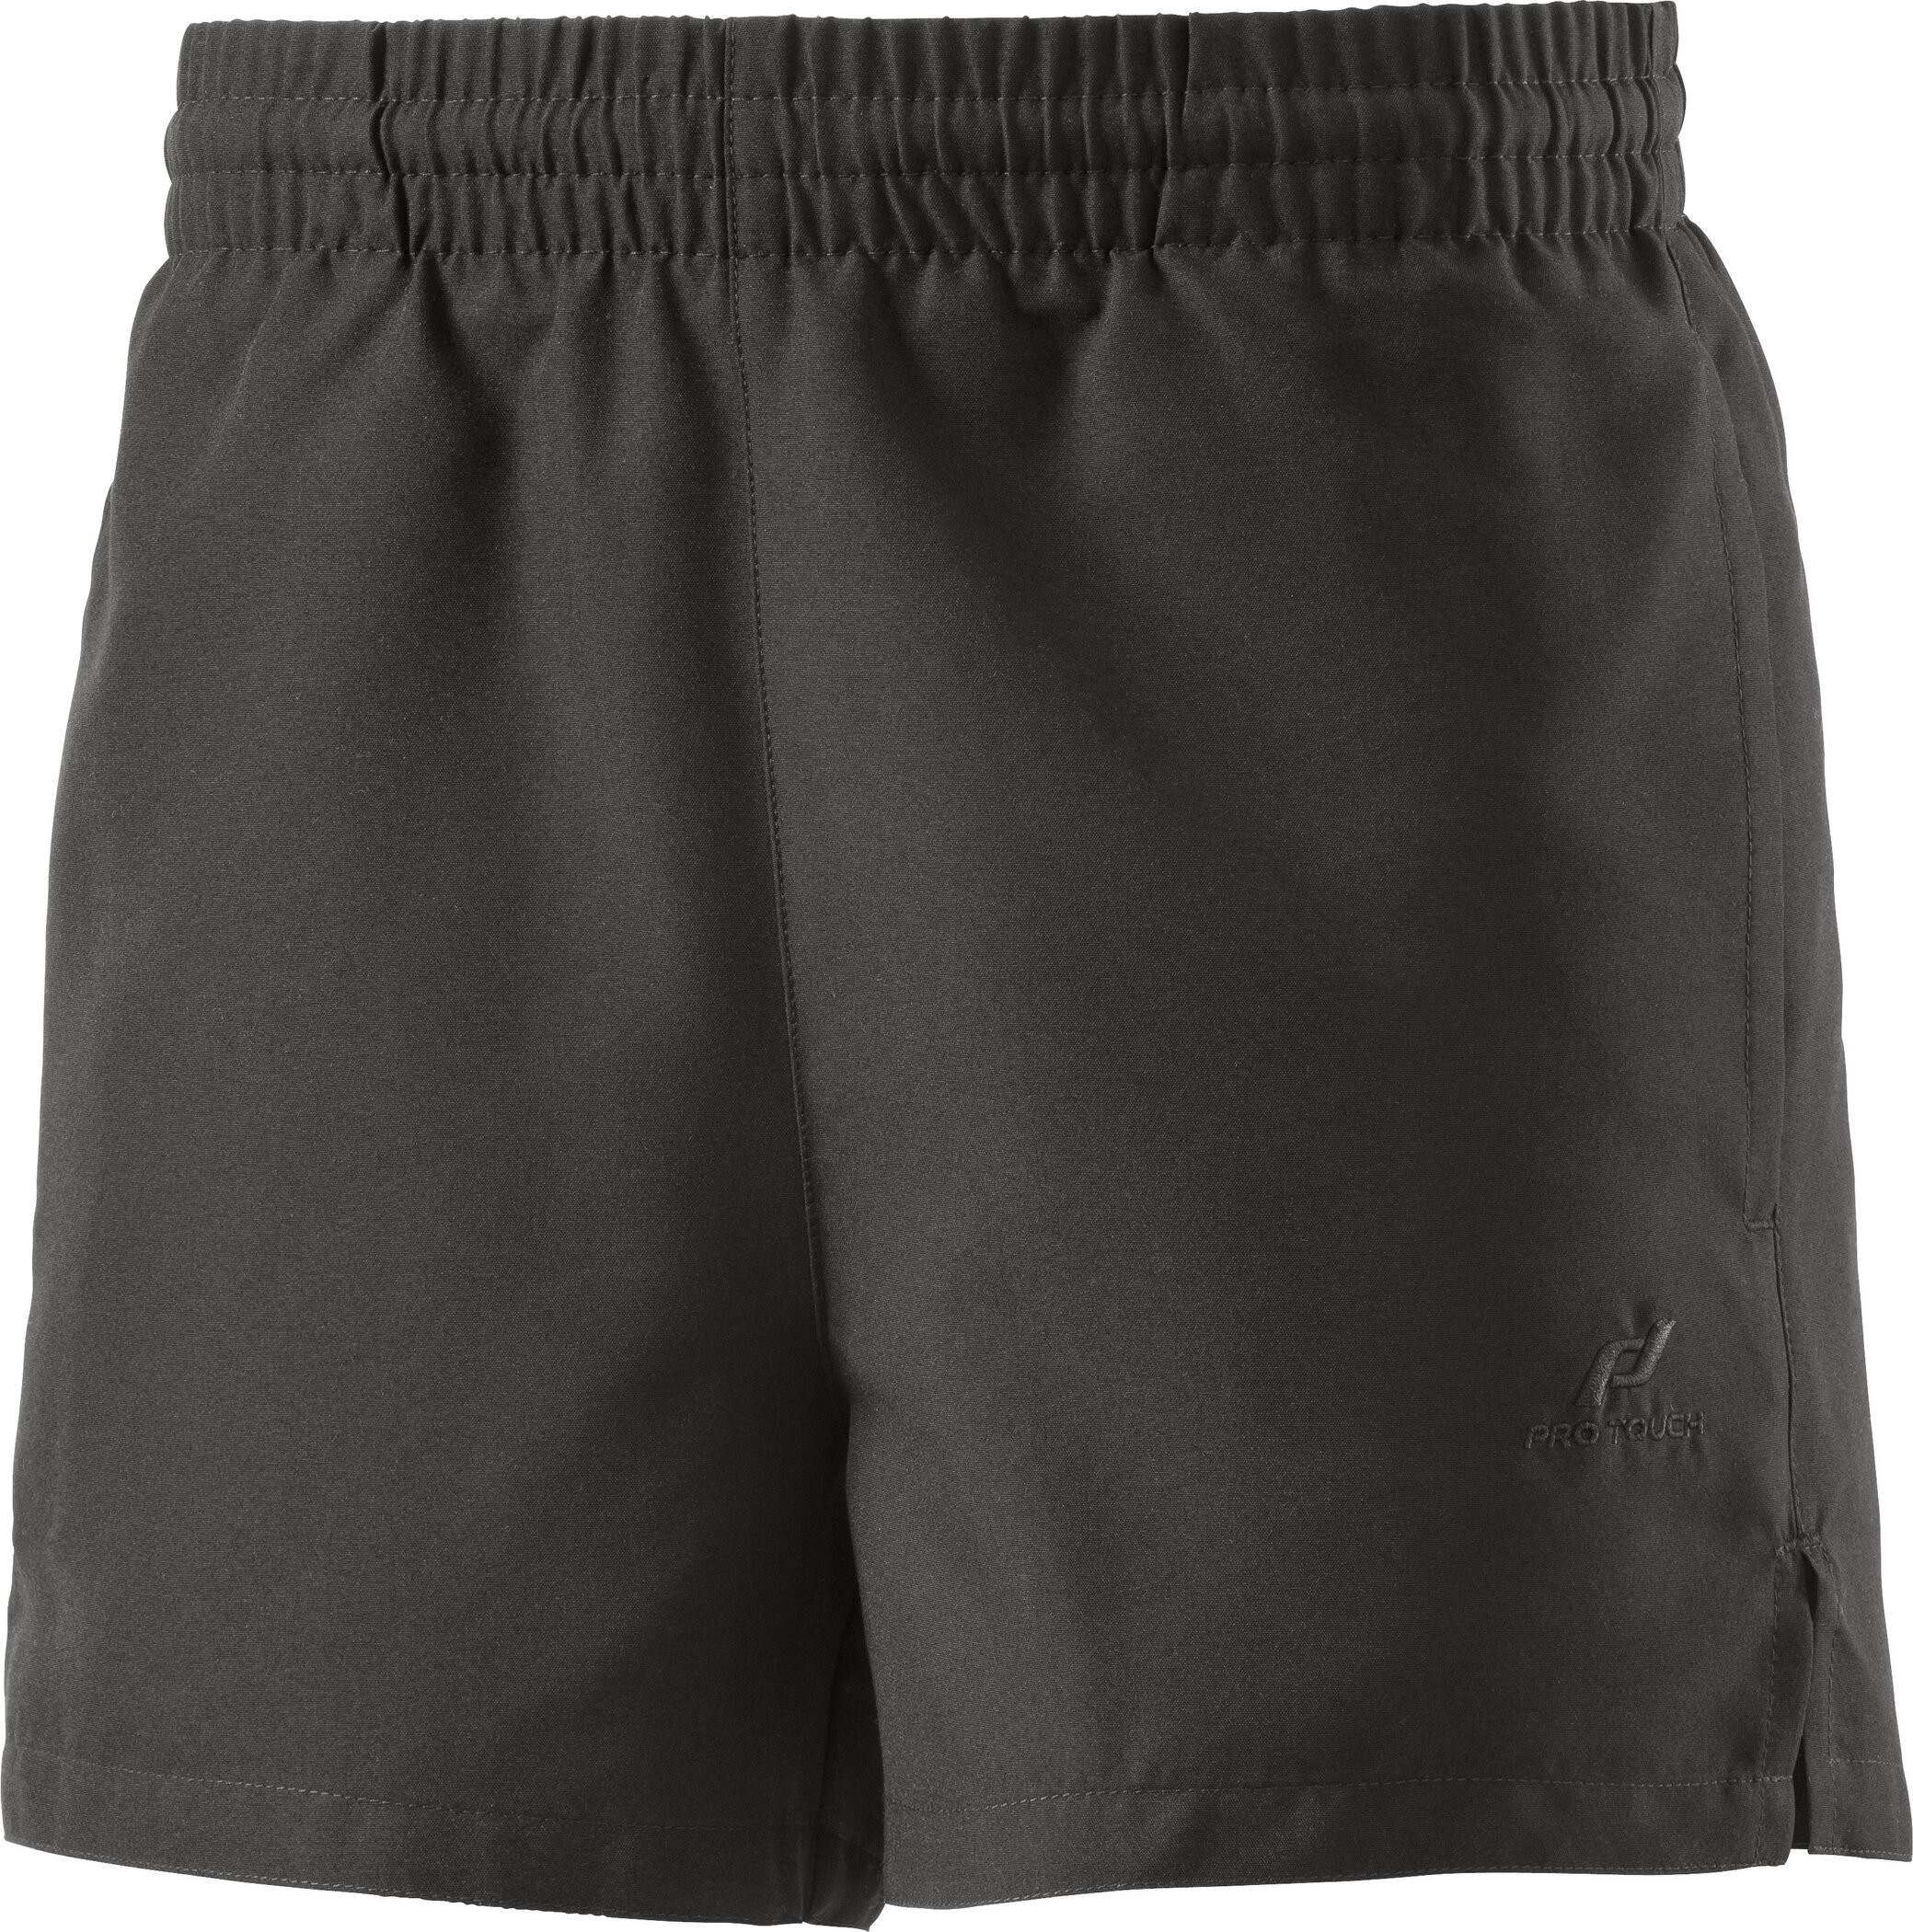 PRO TOUCH Kinder Shorts Chicago